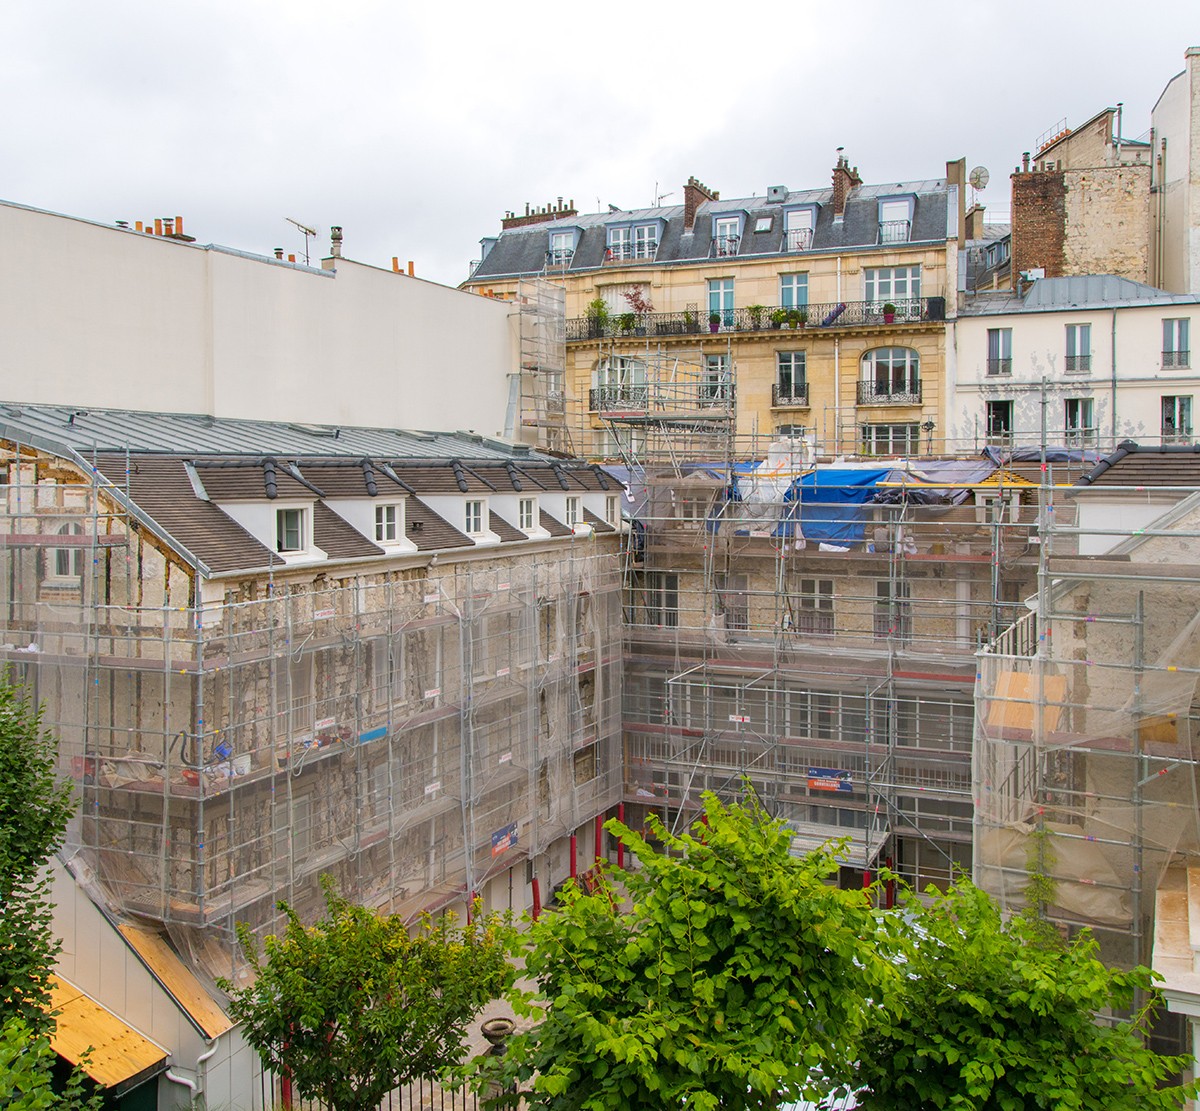 Photograph of the Reid Hall courtyard with the buildings covered by scaffolding